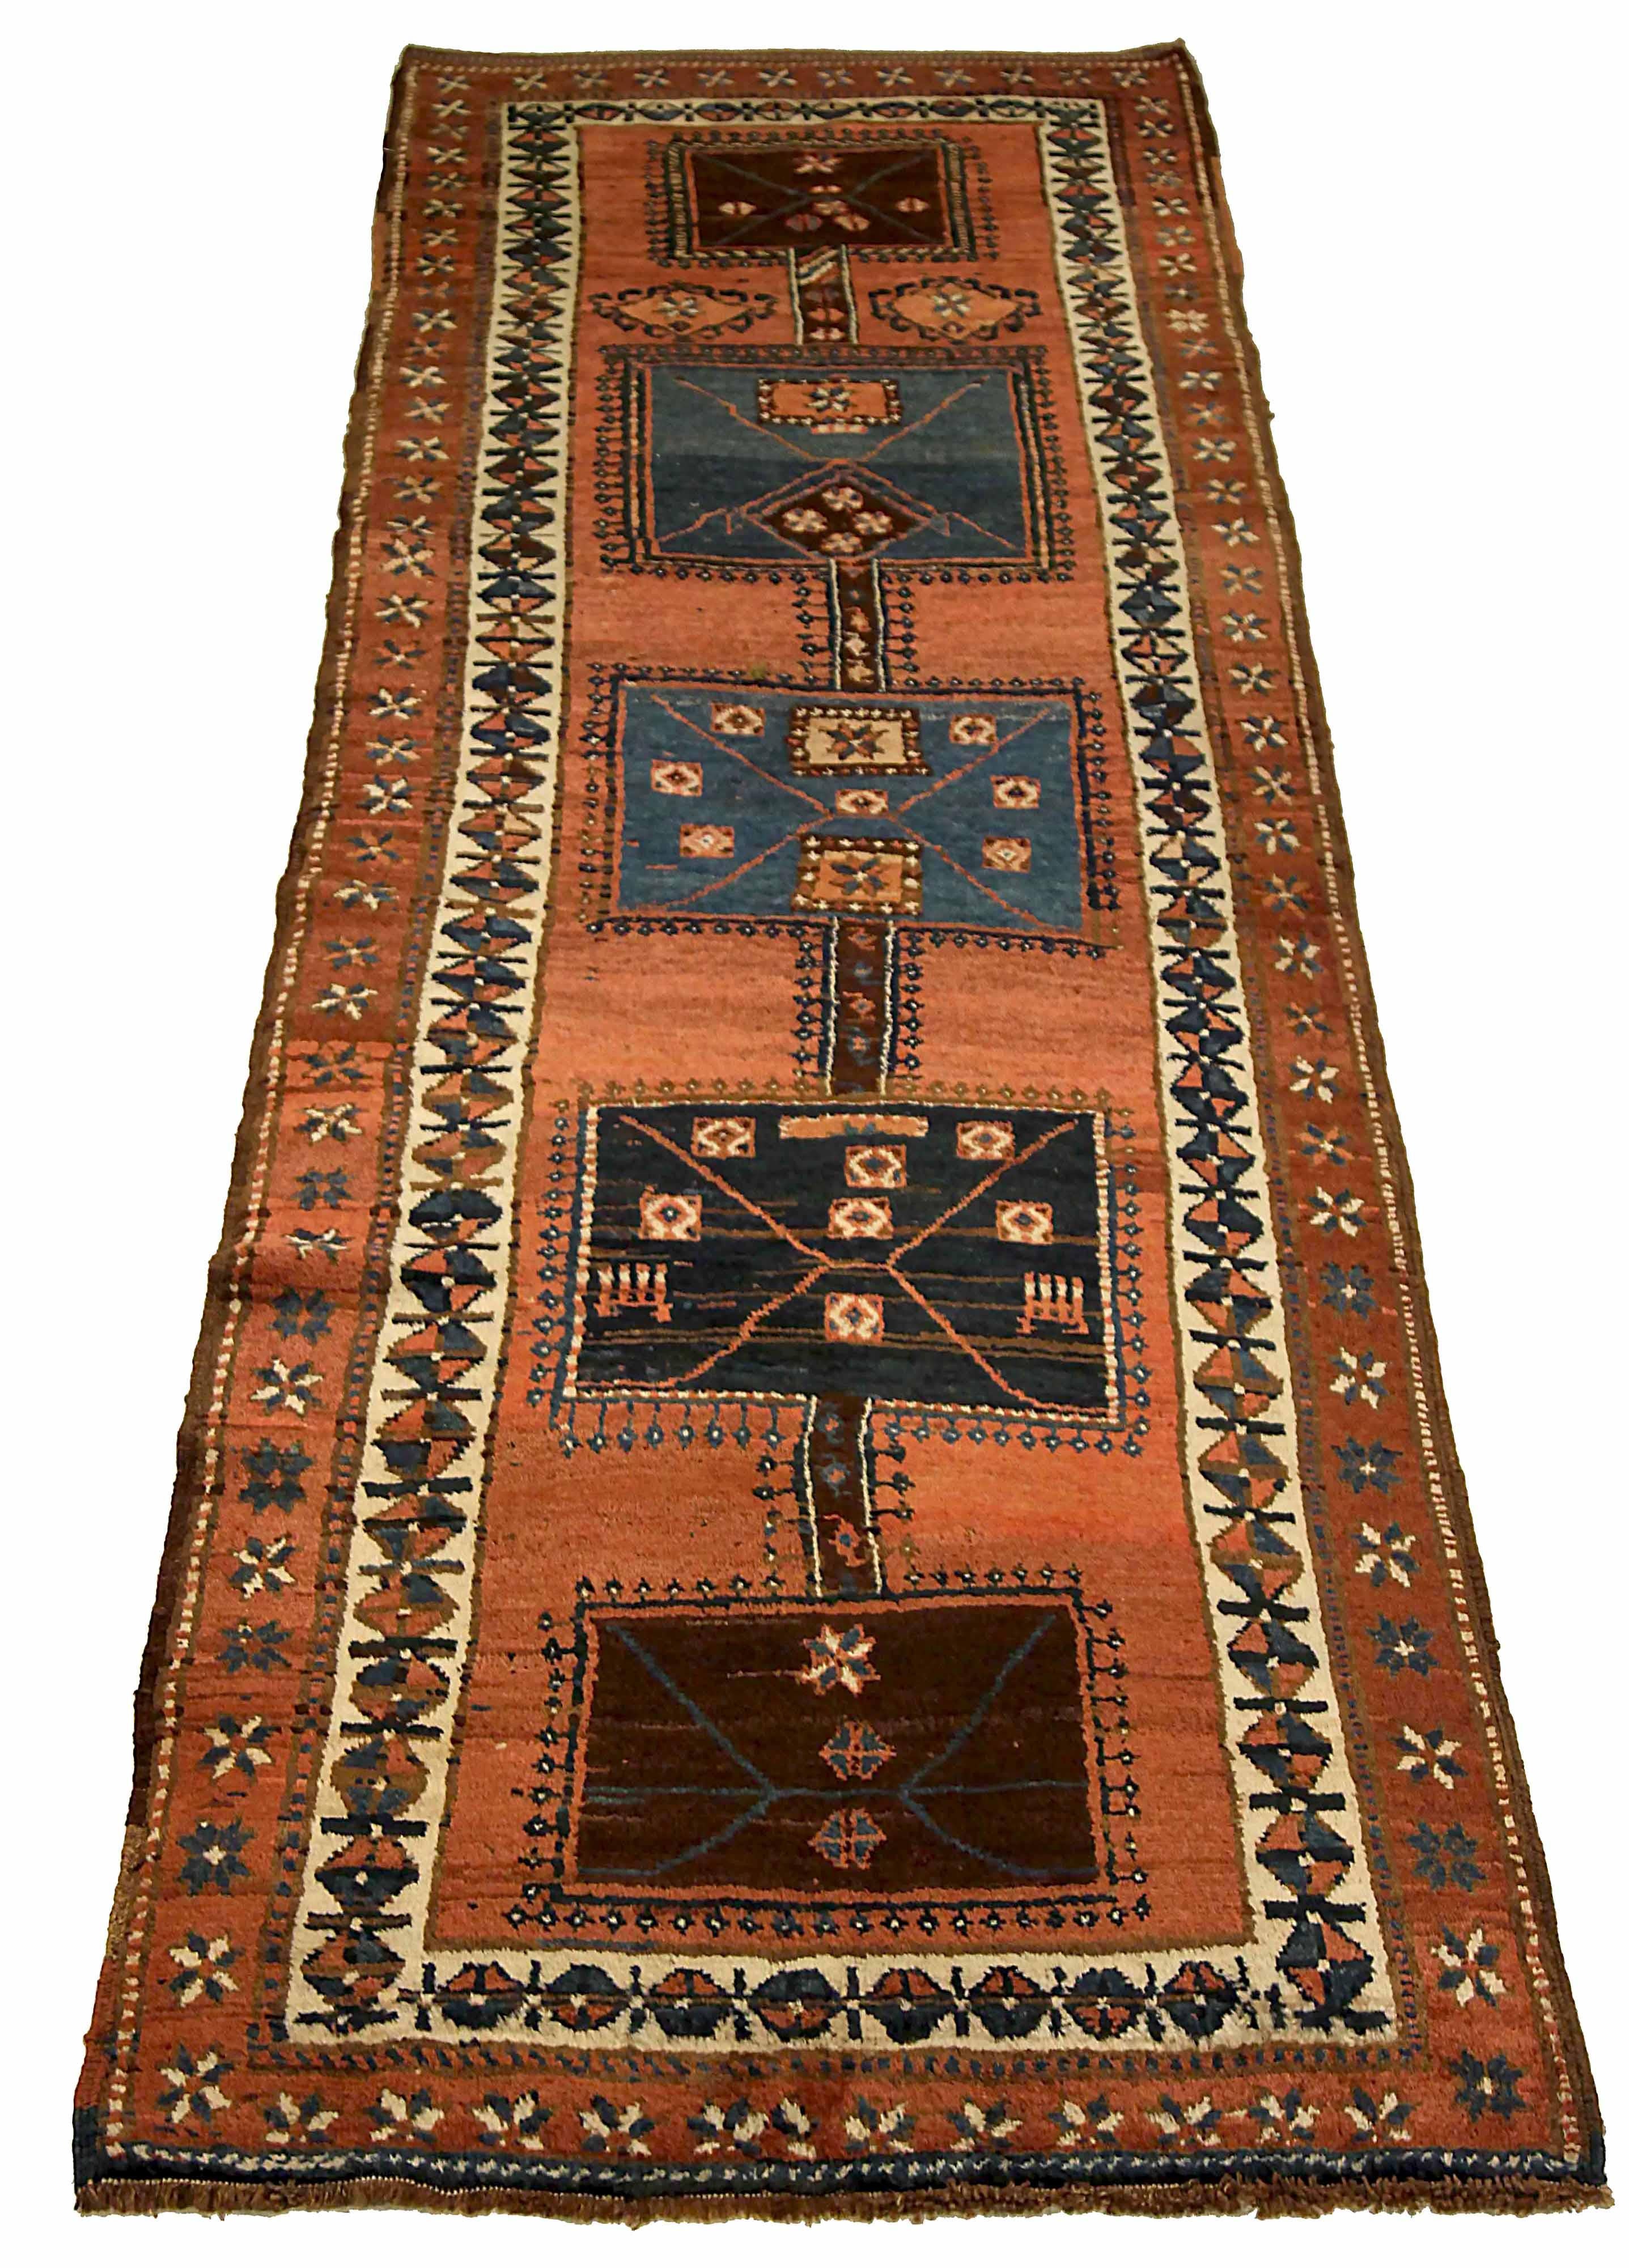 Antique Russian runner rug handwoven from the finest sheep’s wool. It’s colored with all-natural vegetable dyes that are safe for humans and pets. It’s a traditional Kazak design handwoven by expert artisans. It’s a lovely runner rug that can be